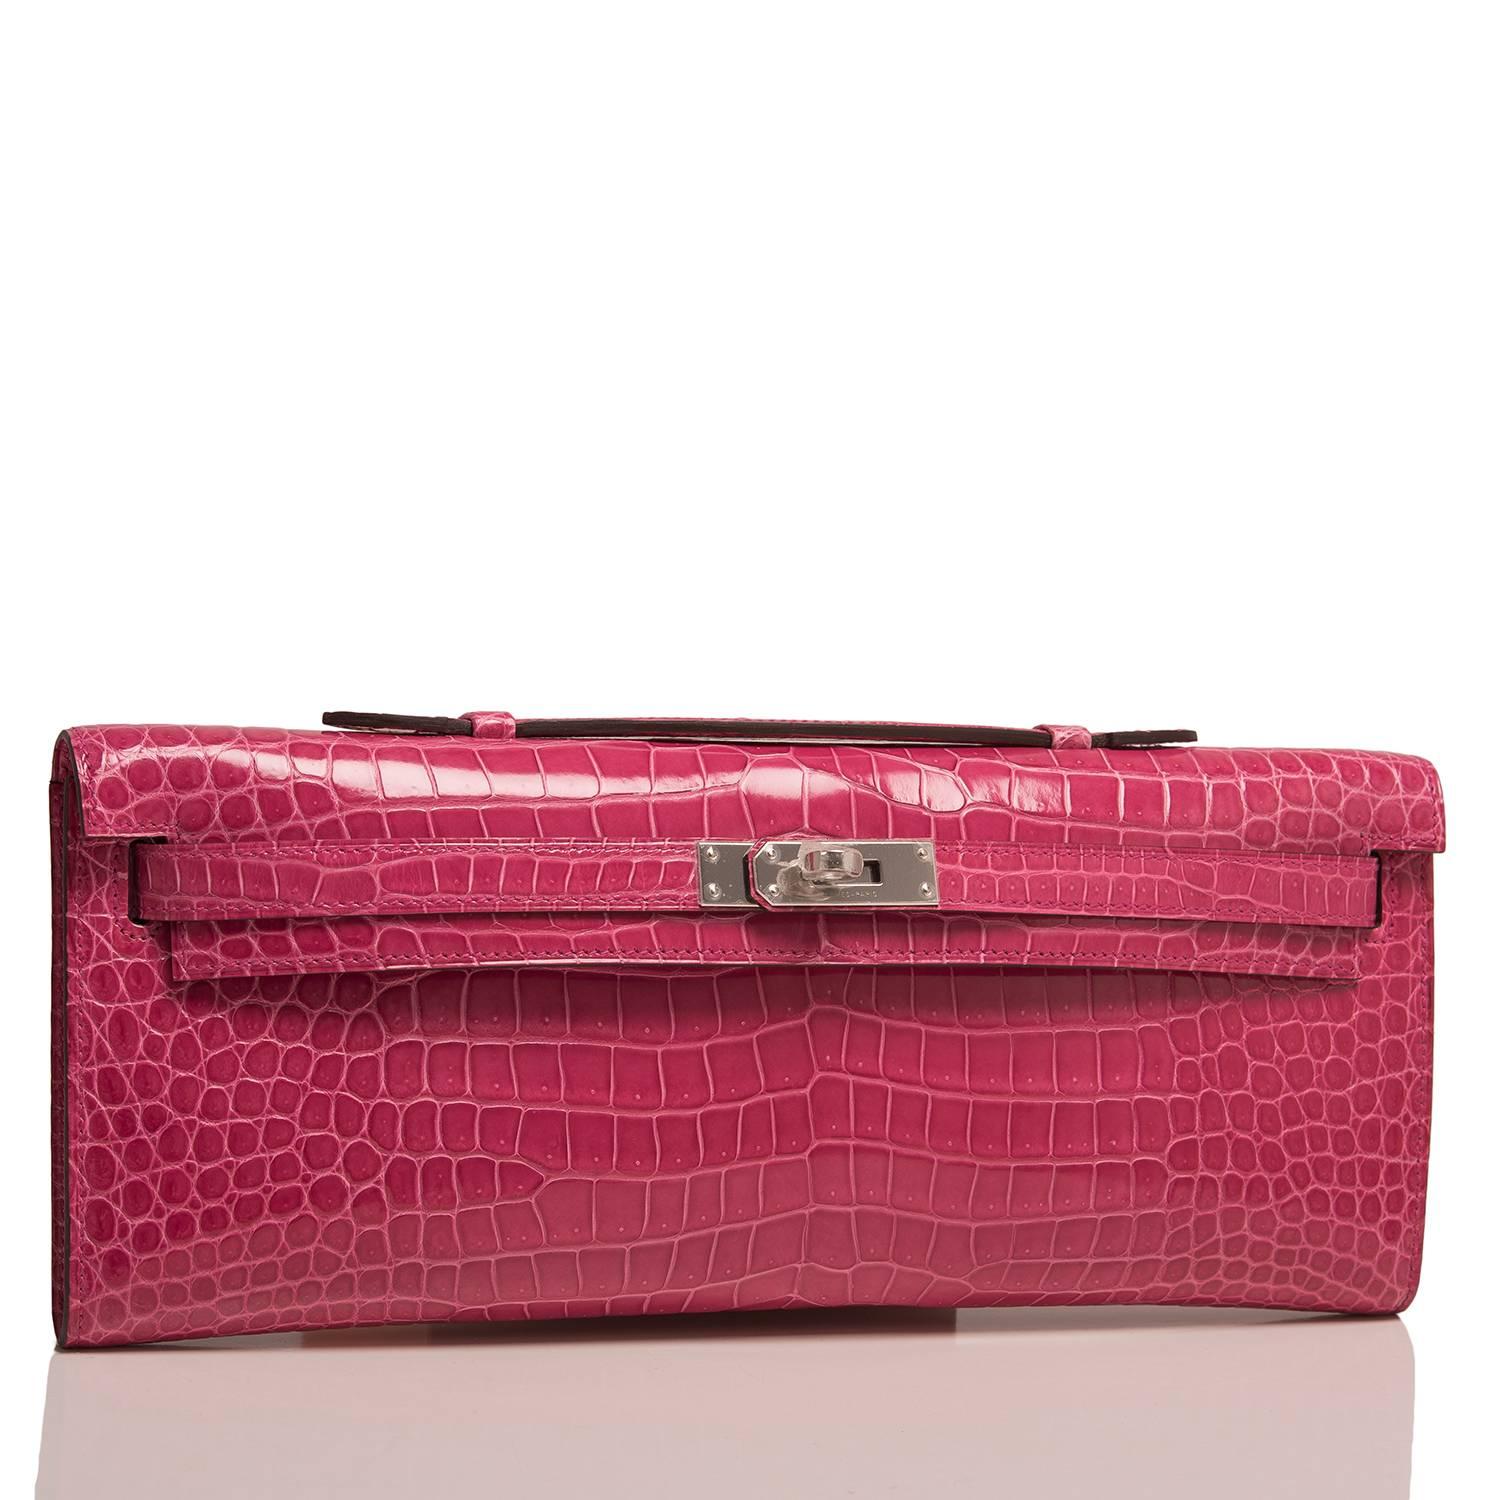 Hermes Rose Tyrien Kelly Cut of shiny porosus crocodile with palladium hardware.

This Kelly Cut has tonal stitching, front straps with a toggle closure and a top flat handle.

The interior is lined with Rose Tyrien chevre leather and features